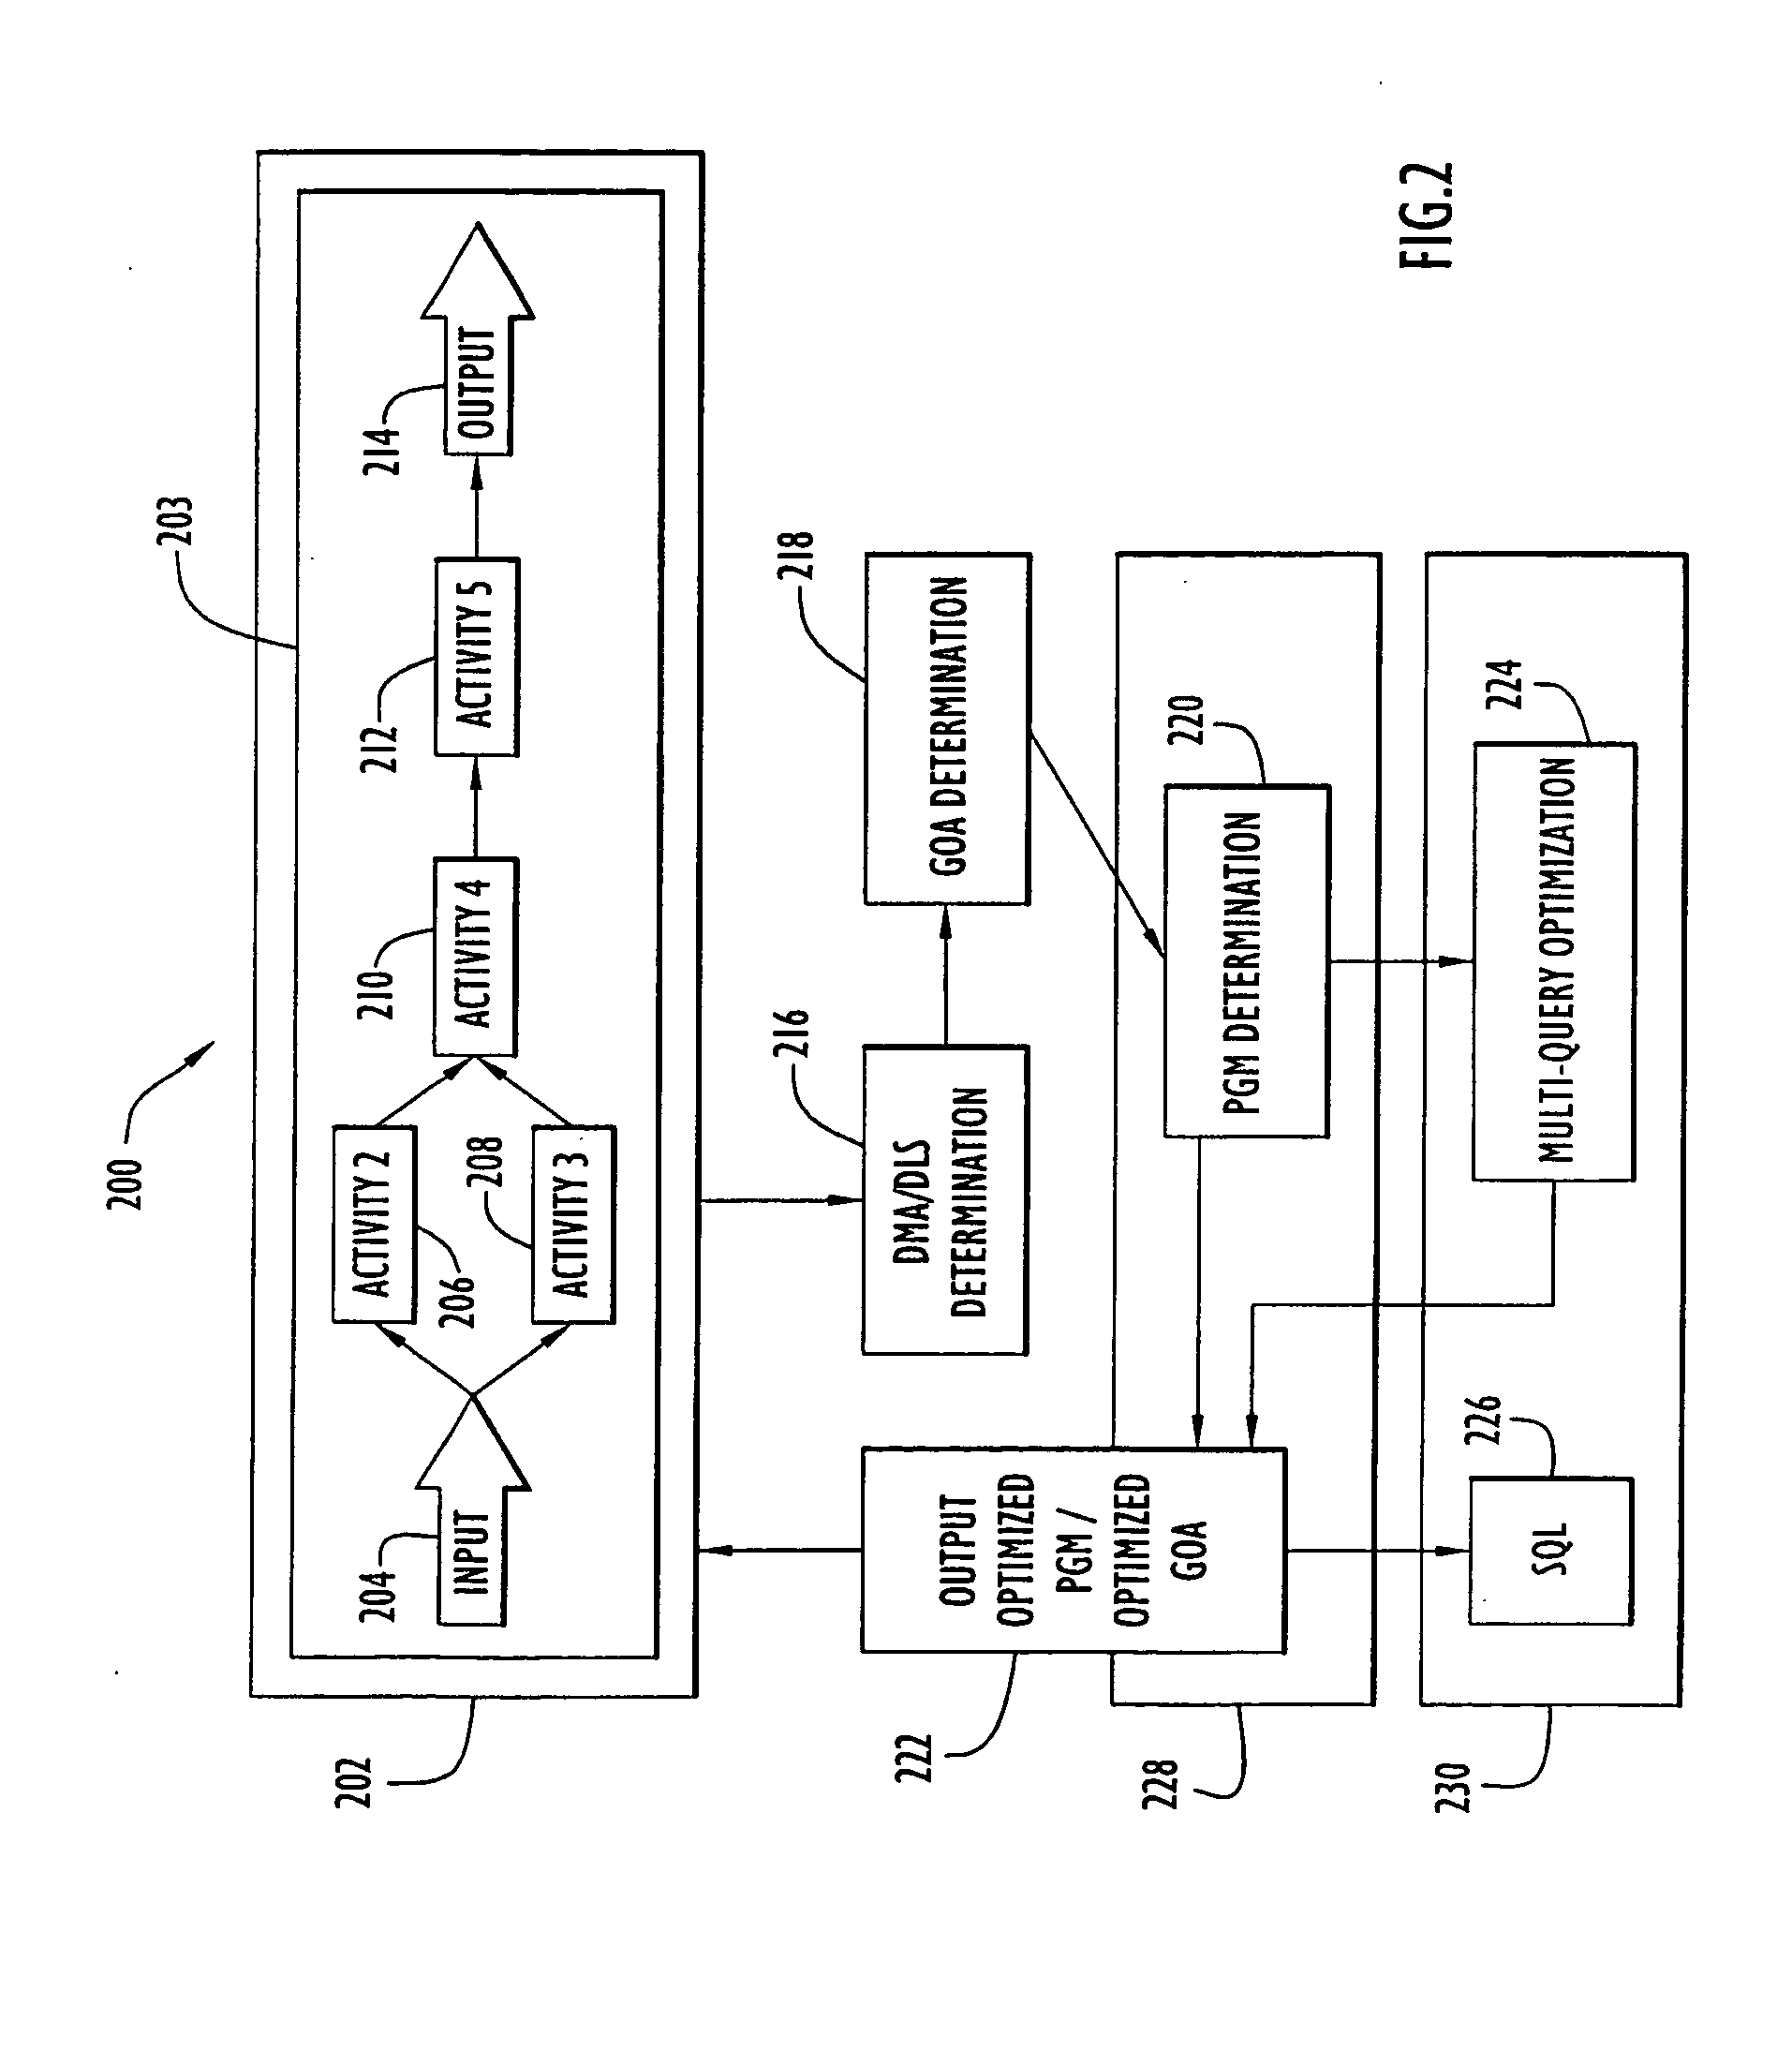 Method and Apparatus for Optimization in Workflow Management Systems